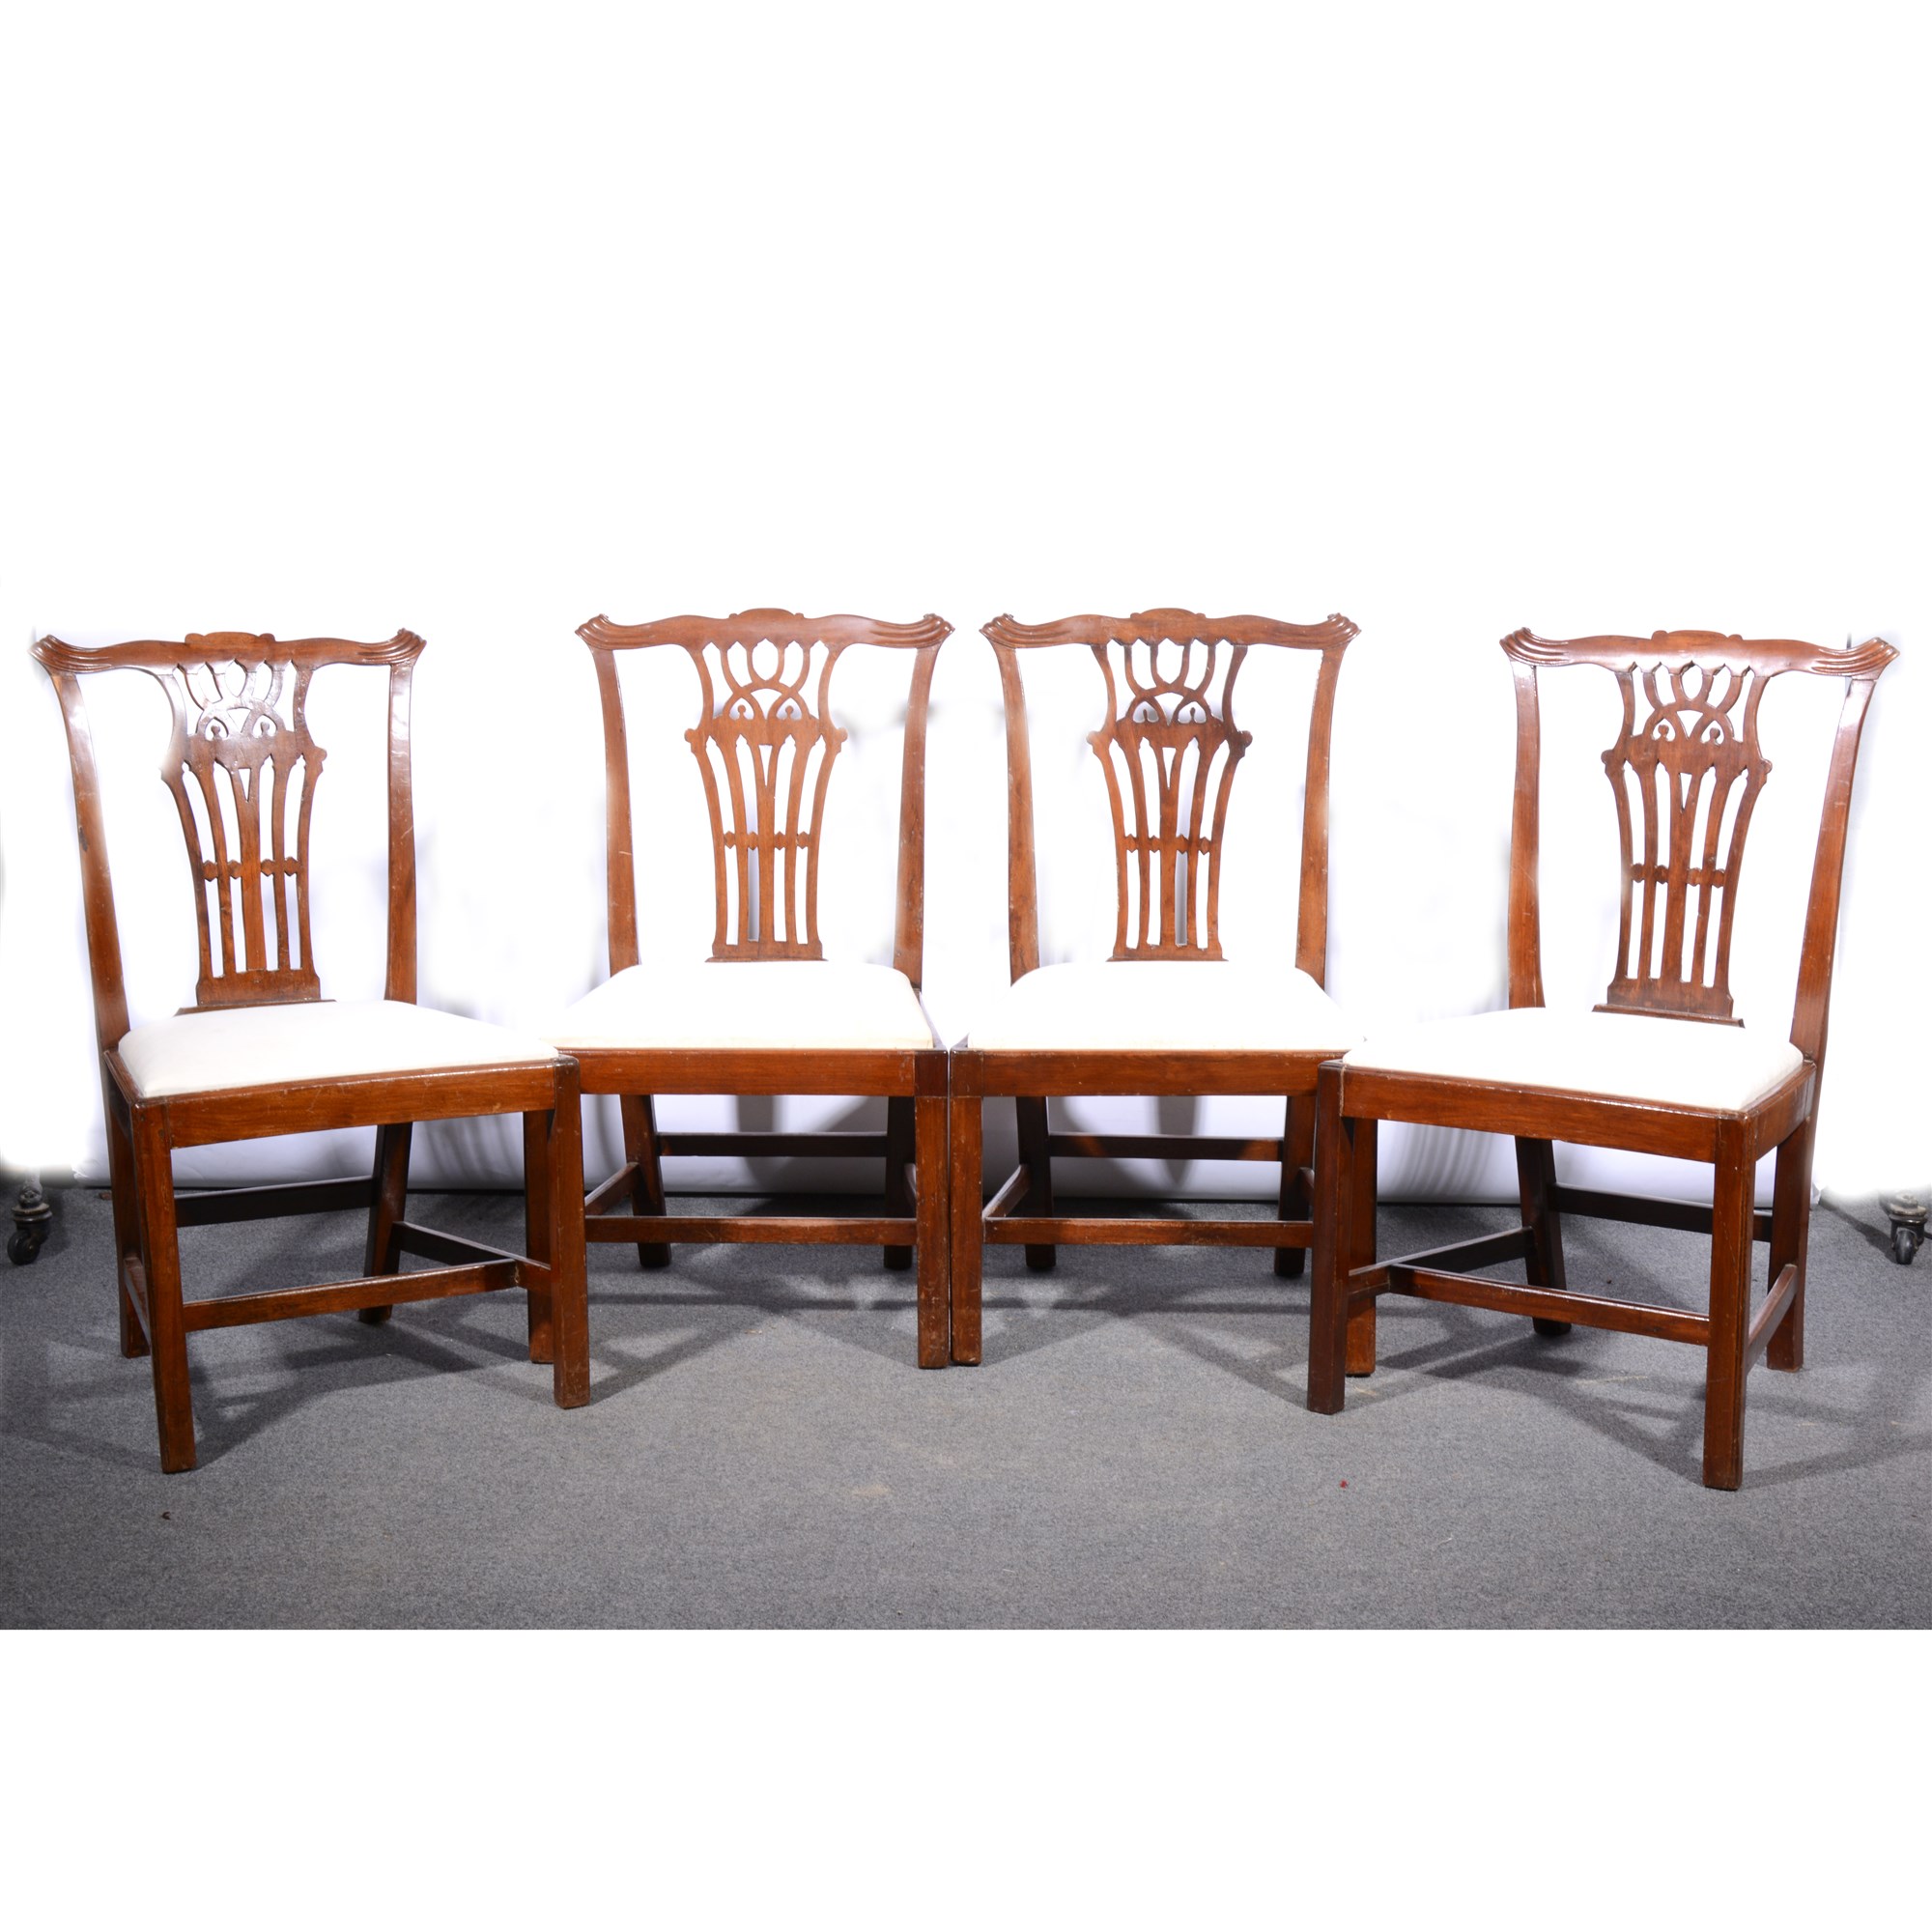 Set of six Chippendale style stained wood dining chairs.